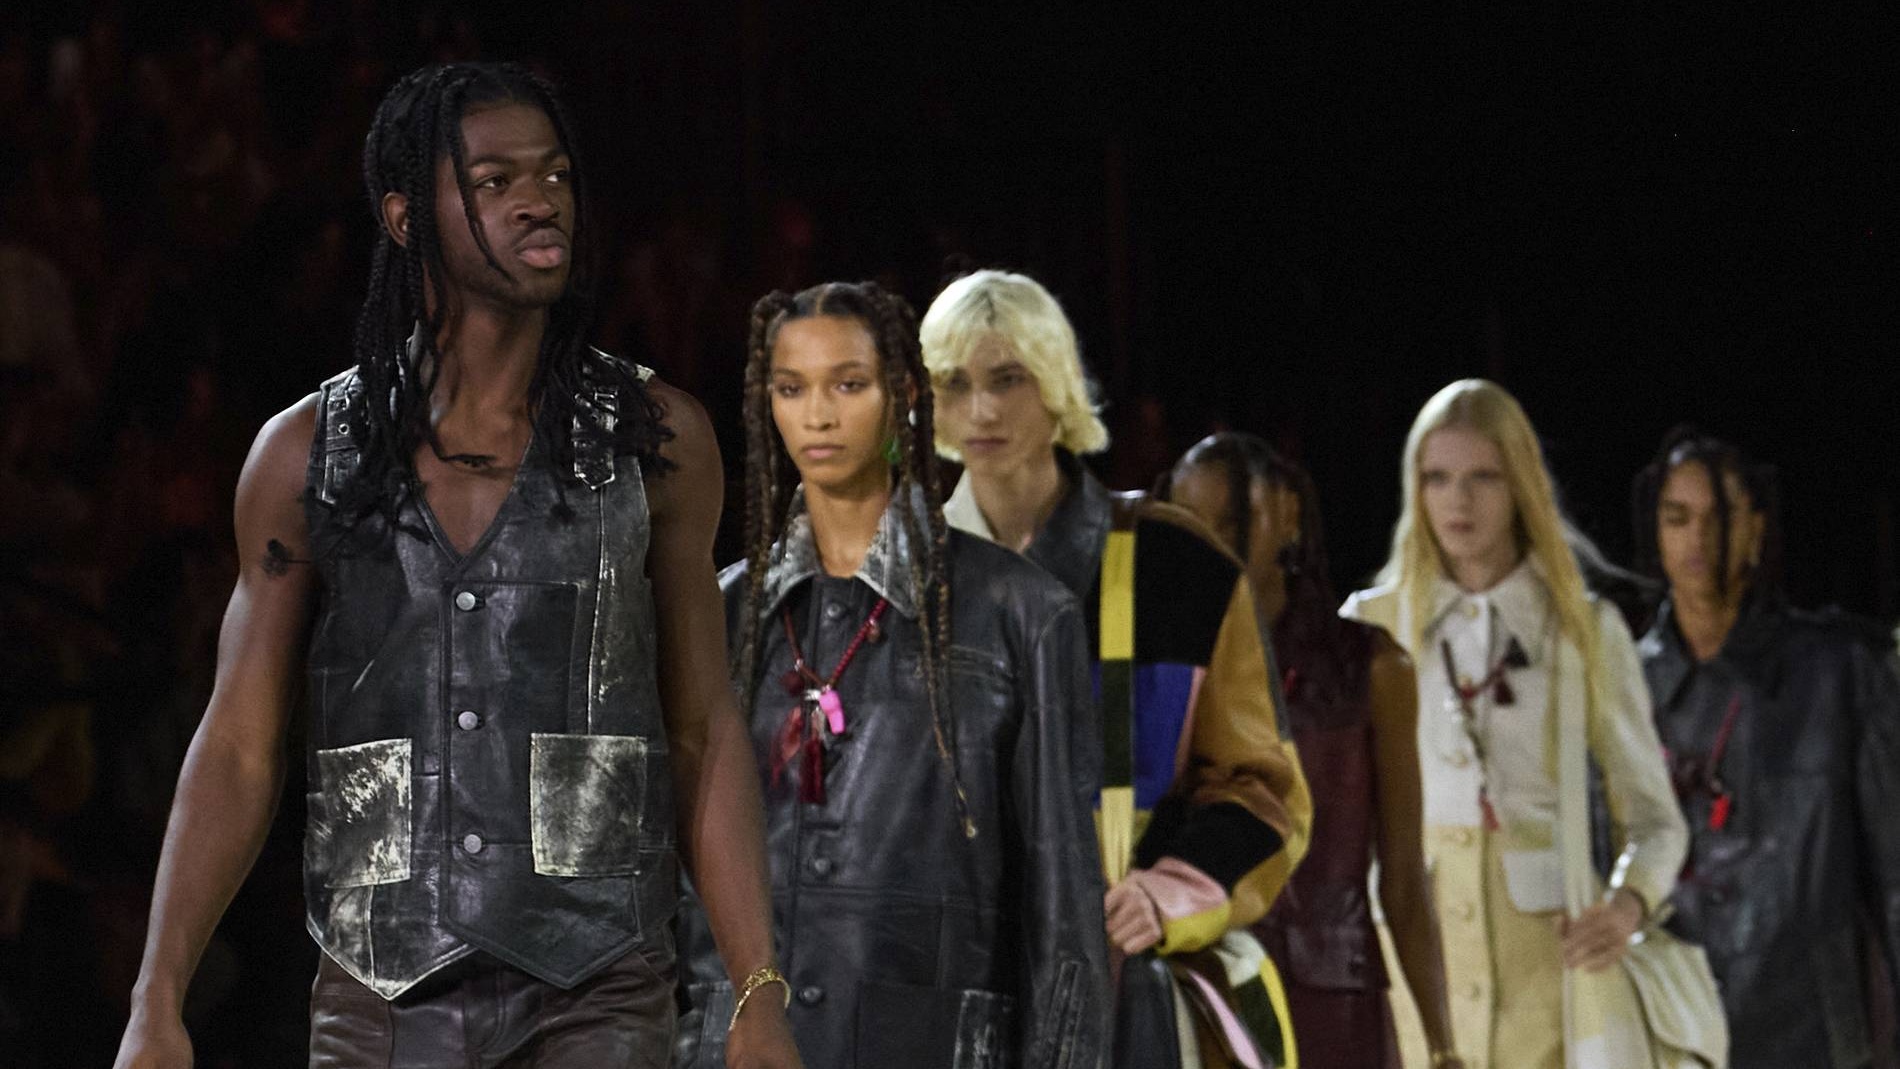 lil nas x leads the final walk for coach's spring 2023 runway show at nyfw 2022